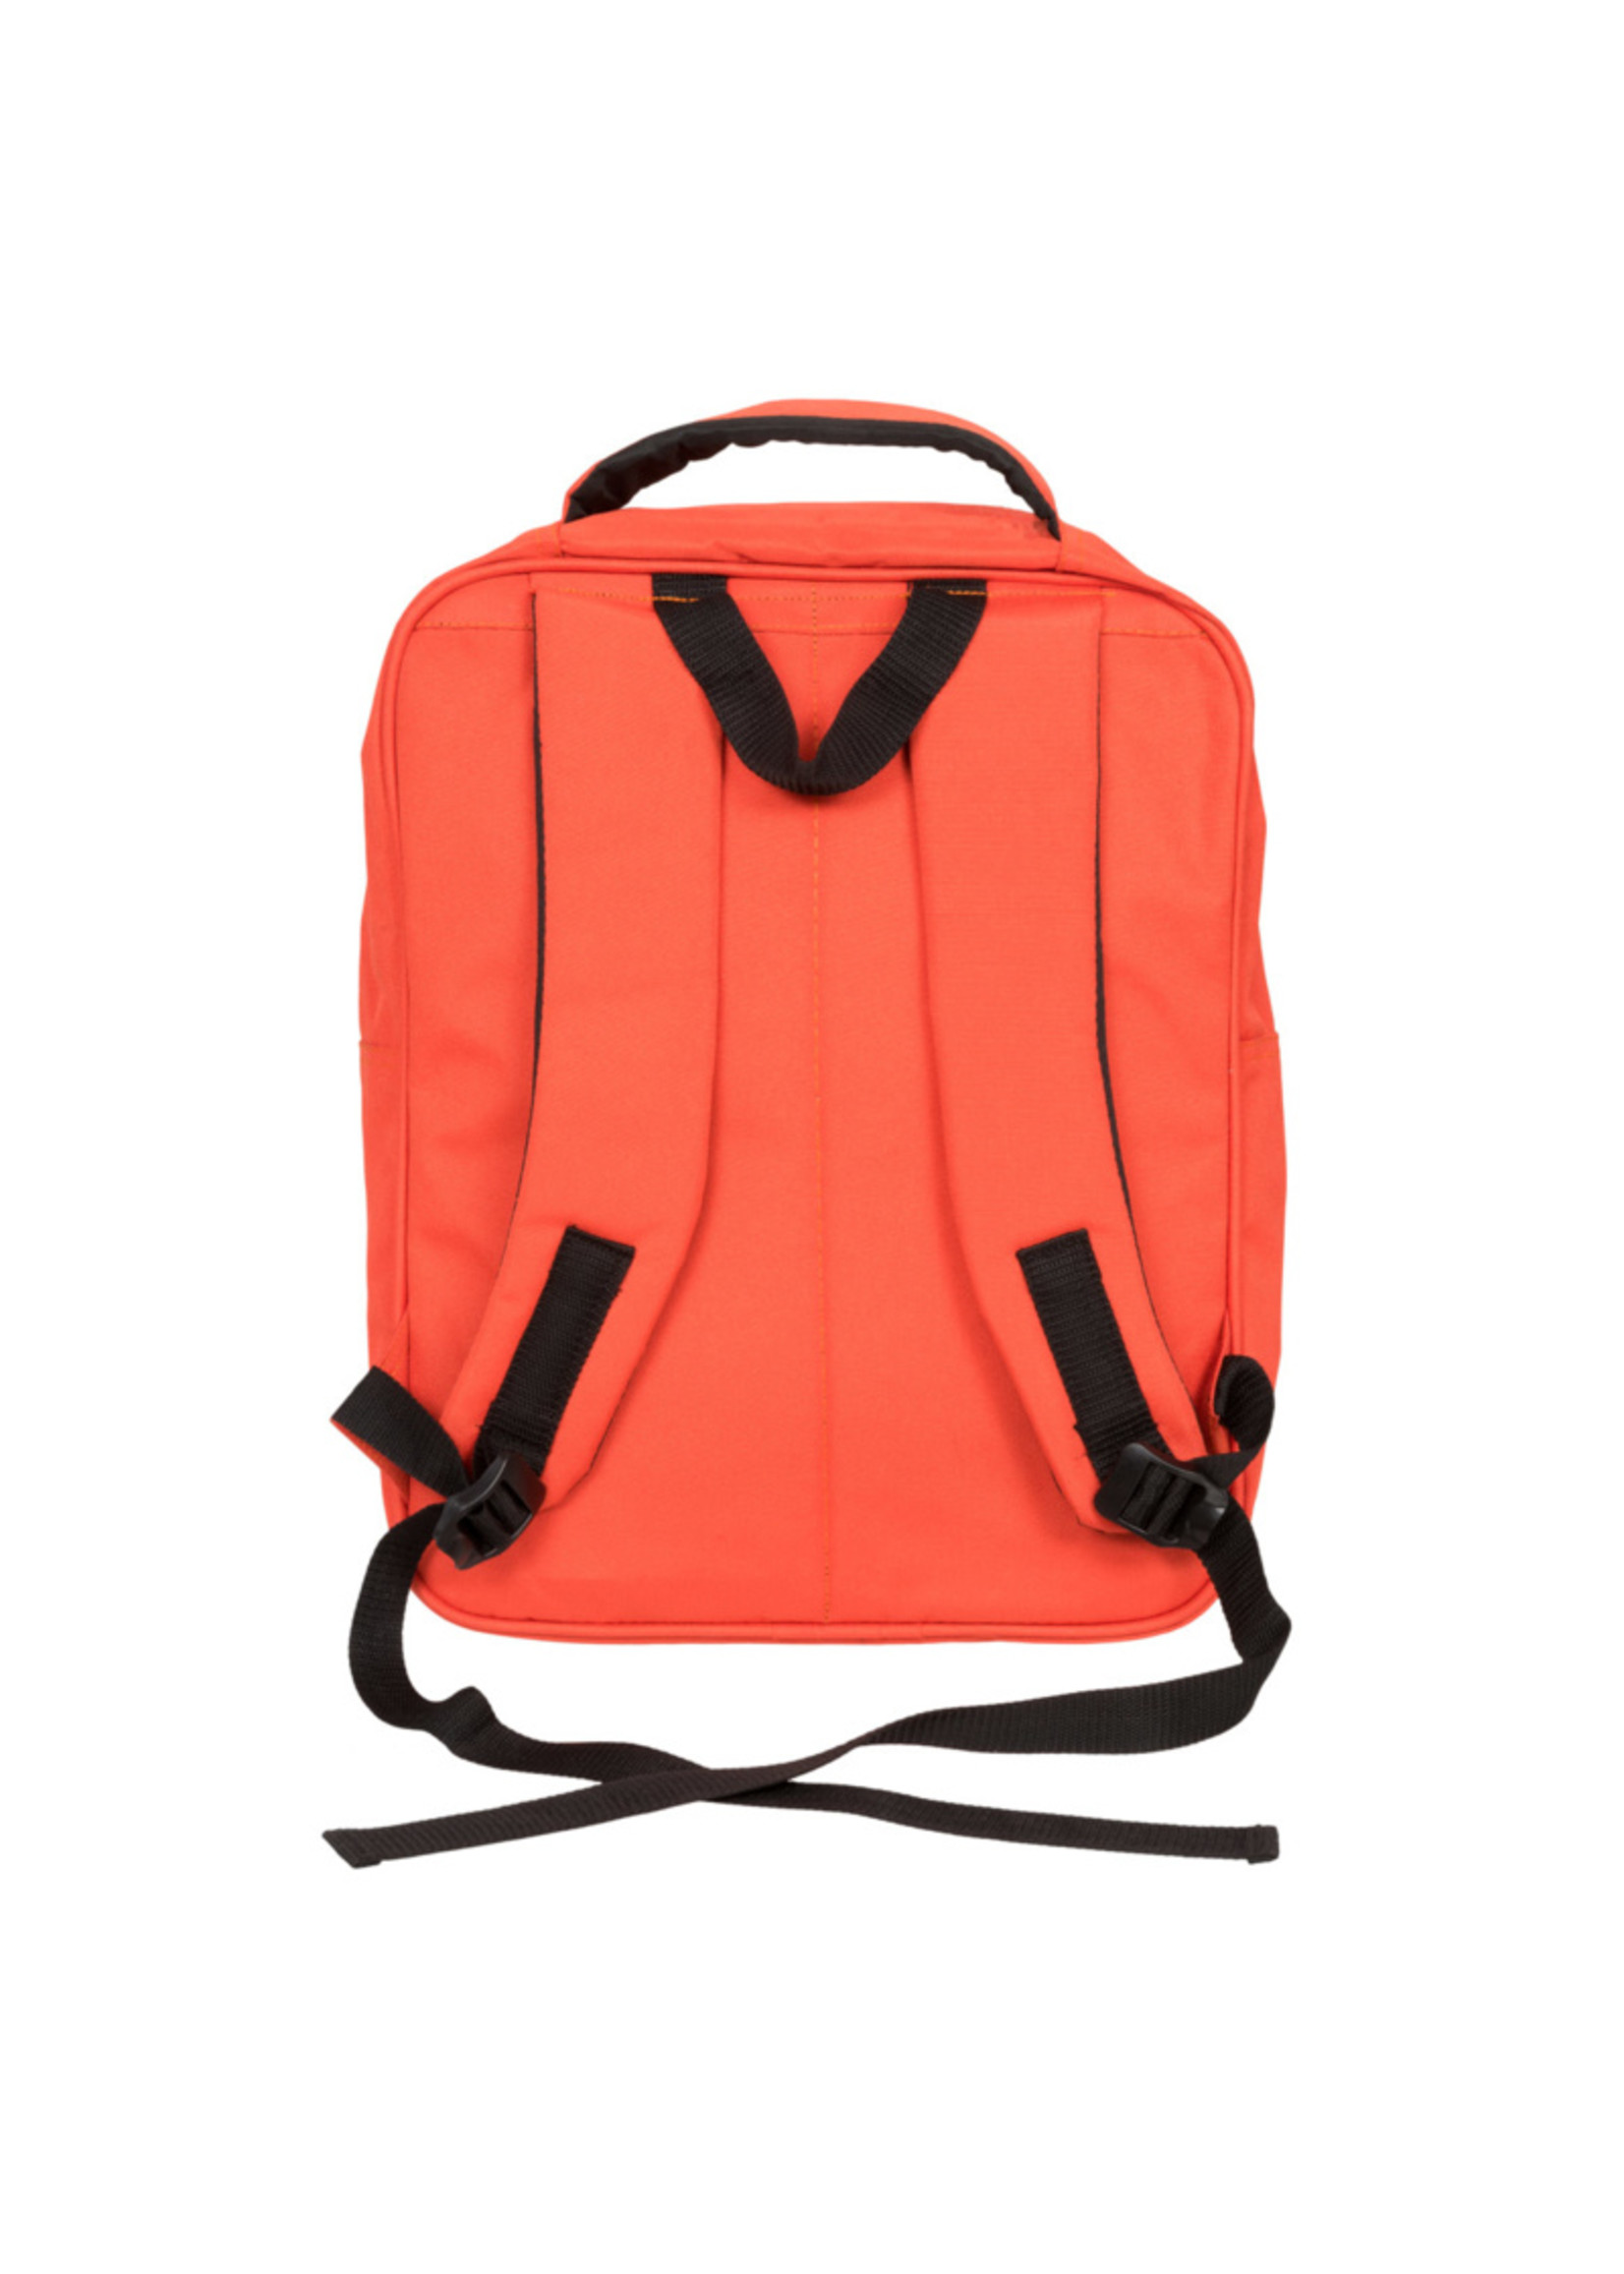 Ecowings Orange backpack with black rubber H40xW32cm